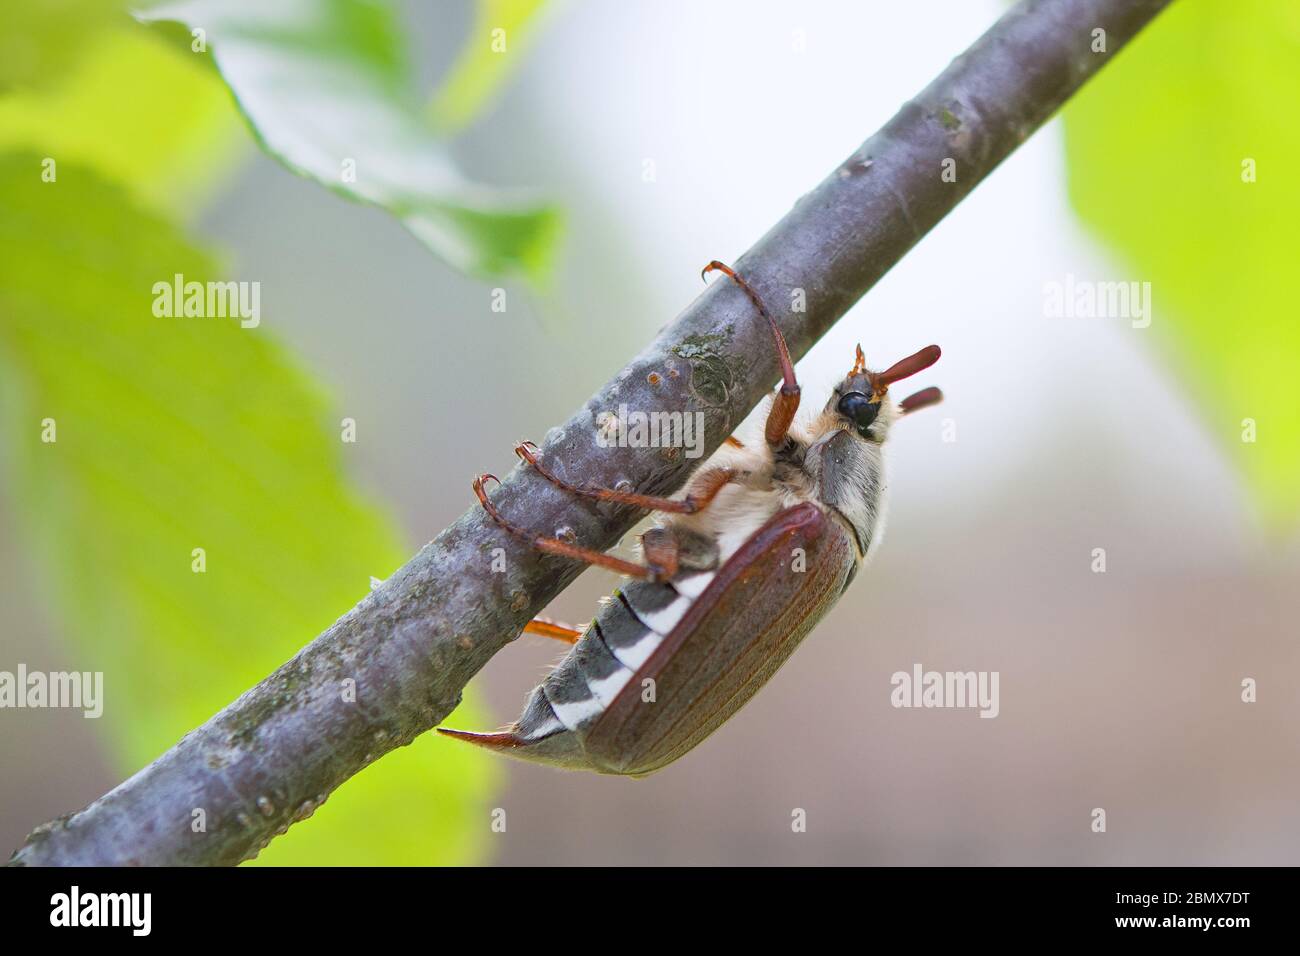 Close up of a chafer beetle on a leaf of a tree in warm colors with a blurred background Stock Photo